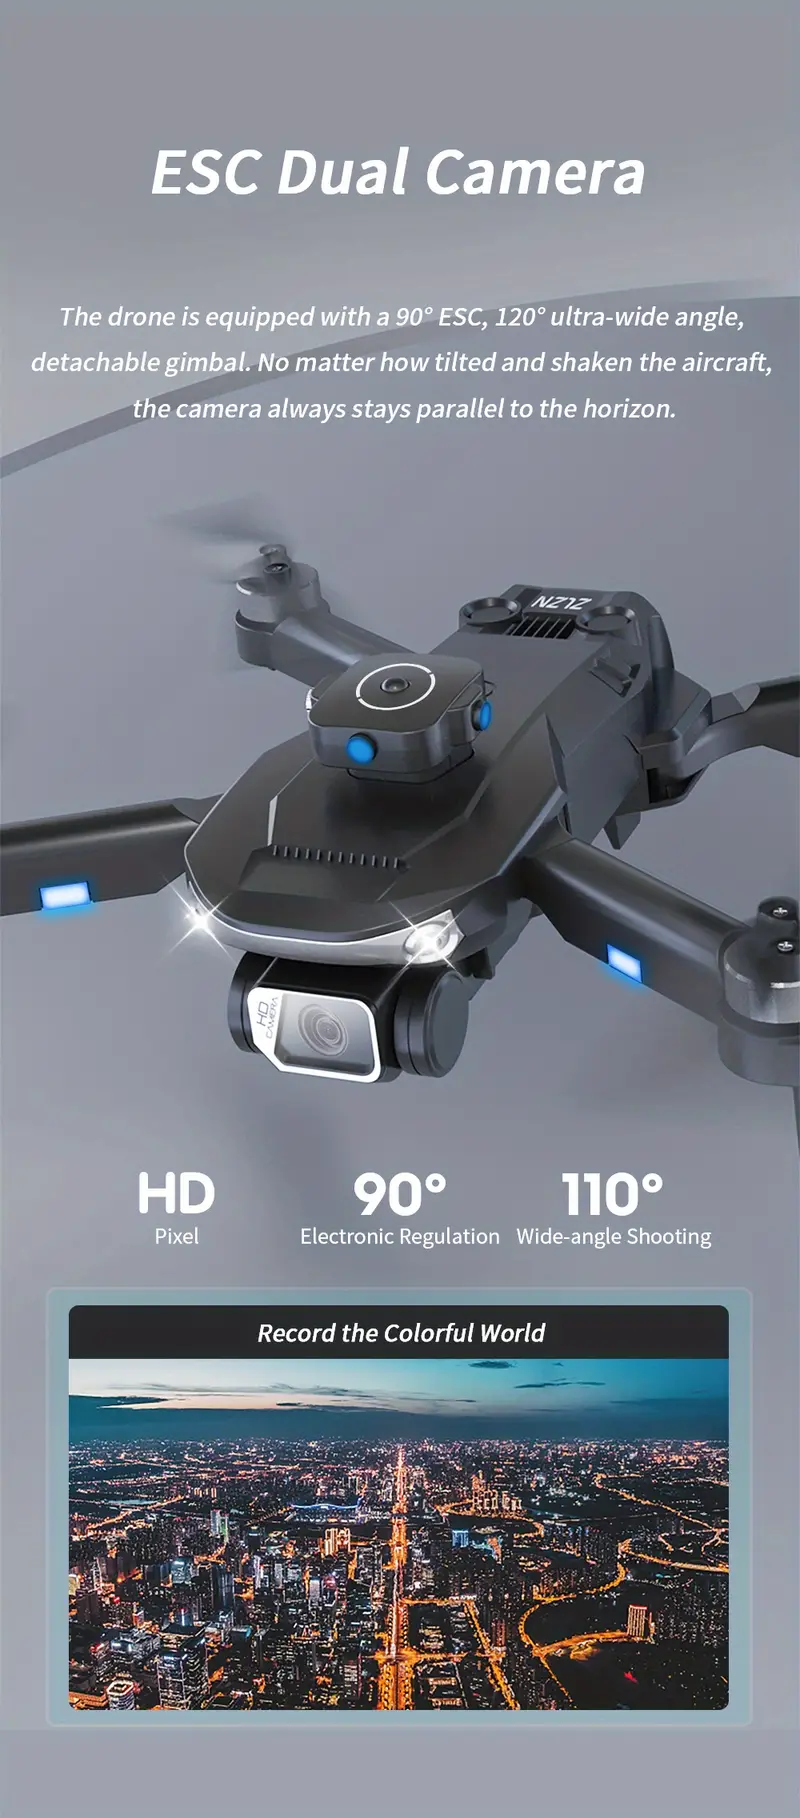 hd dual camera drone obstacle avoidance optical flow positioning headless mode one key take off landing 5g image transmission gesture photography waypoint flight includes carrying bag details 3